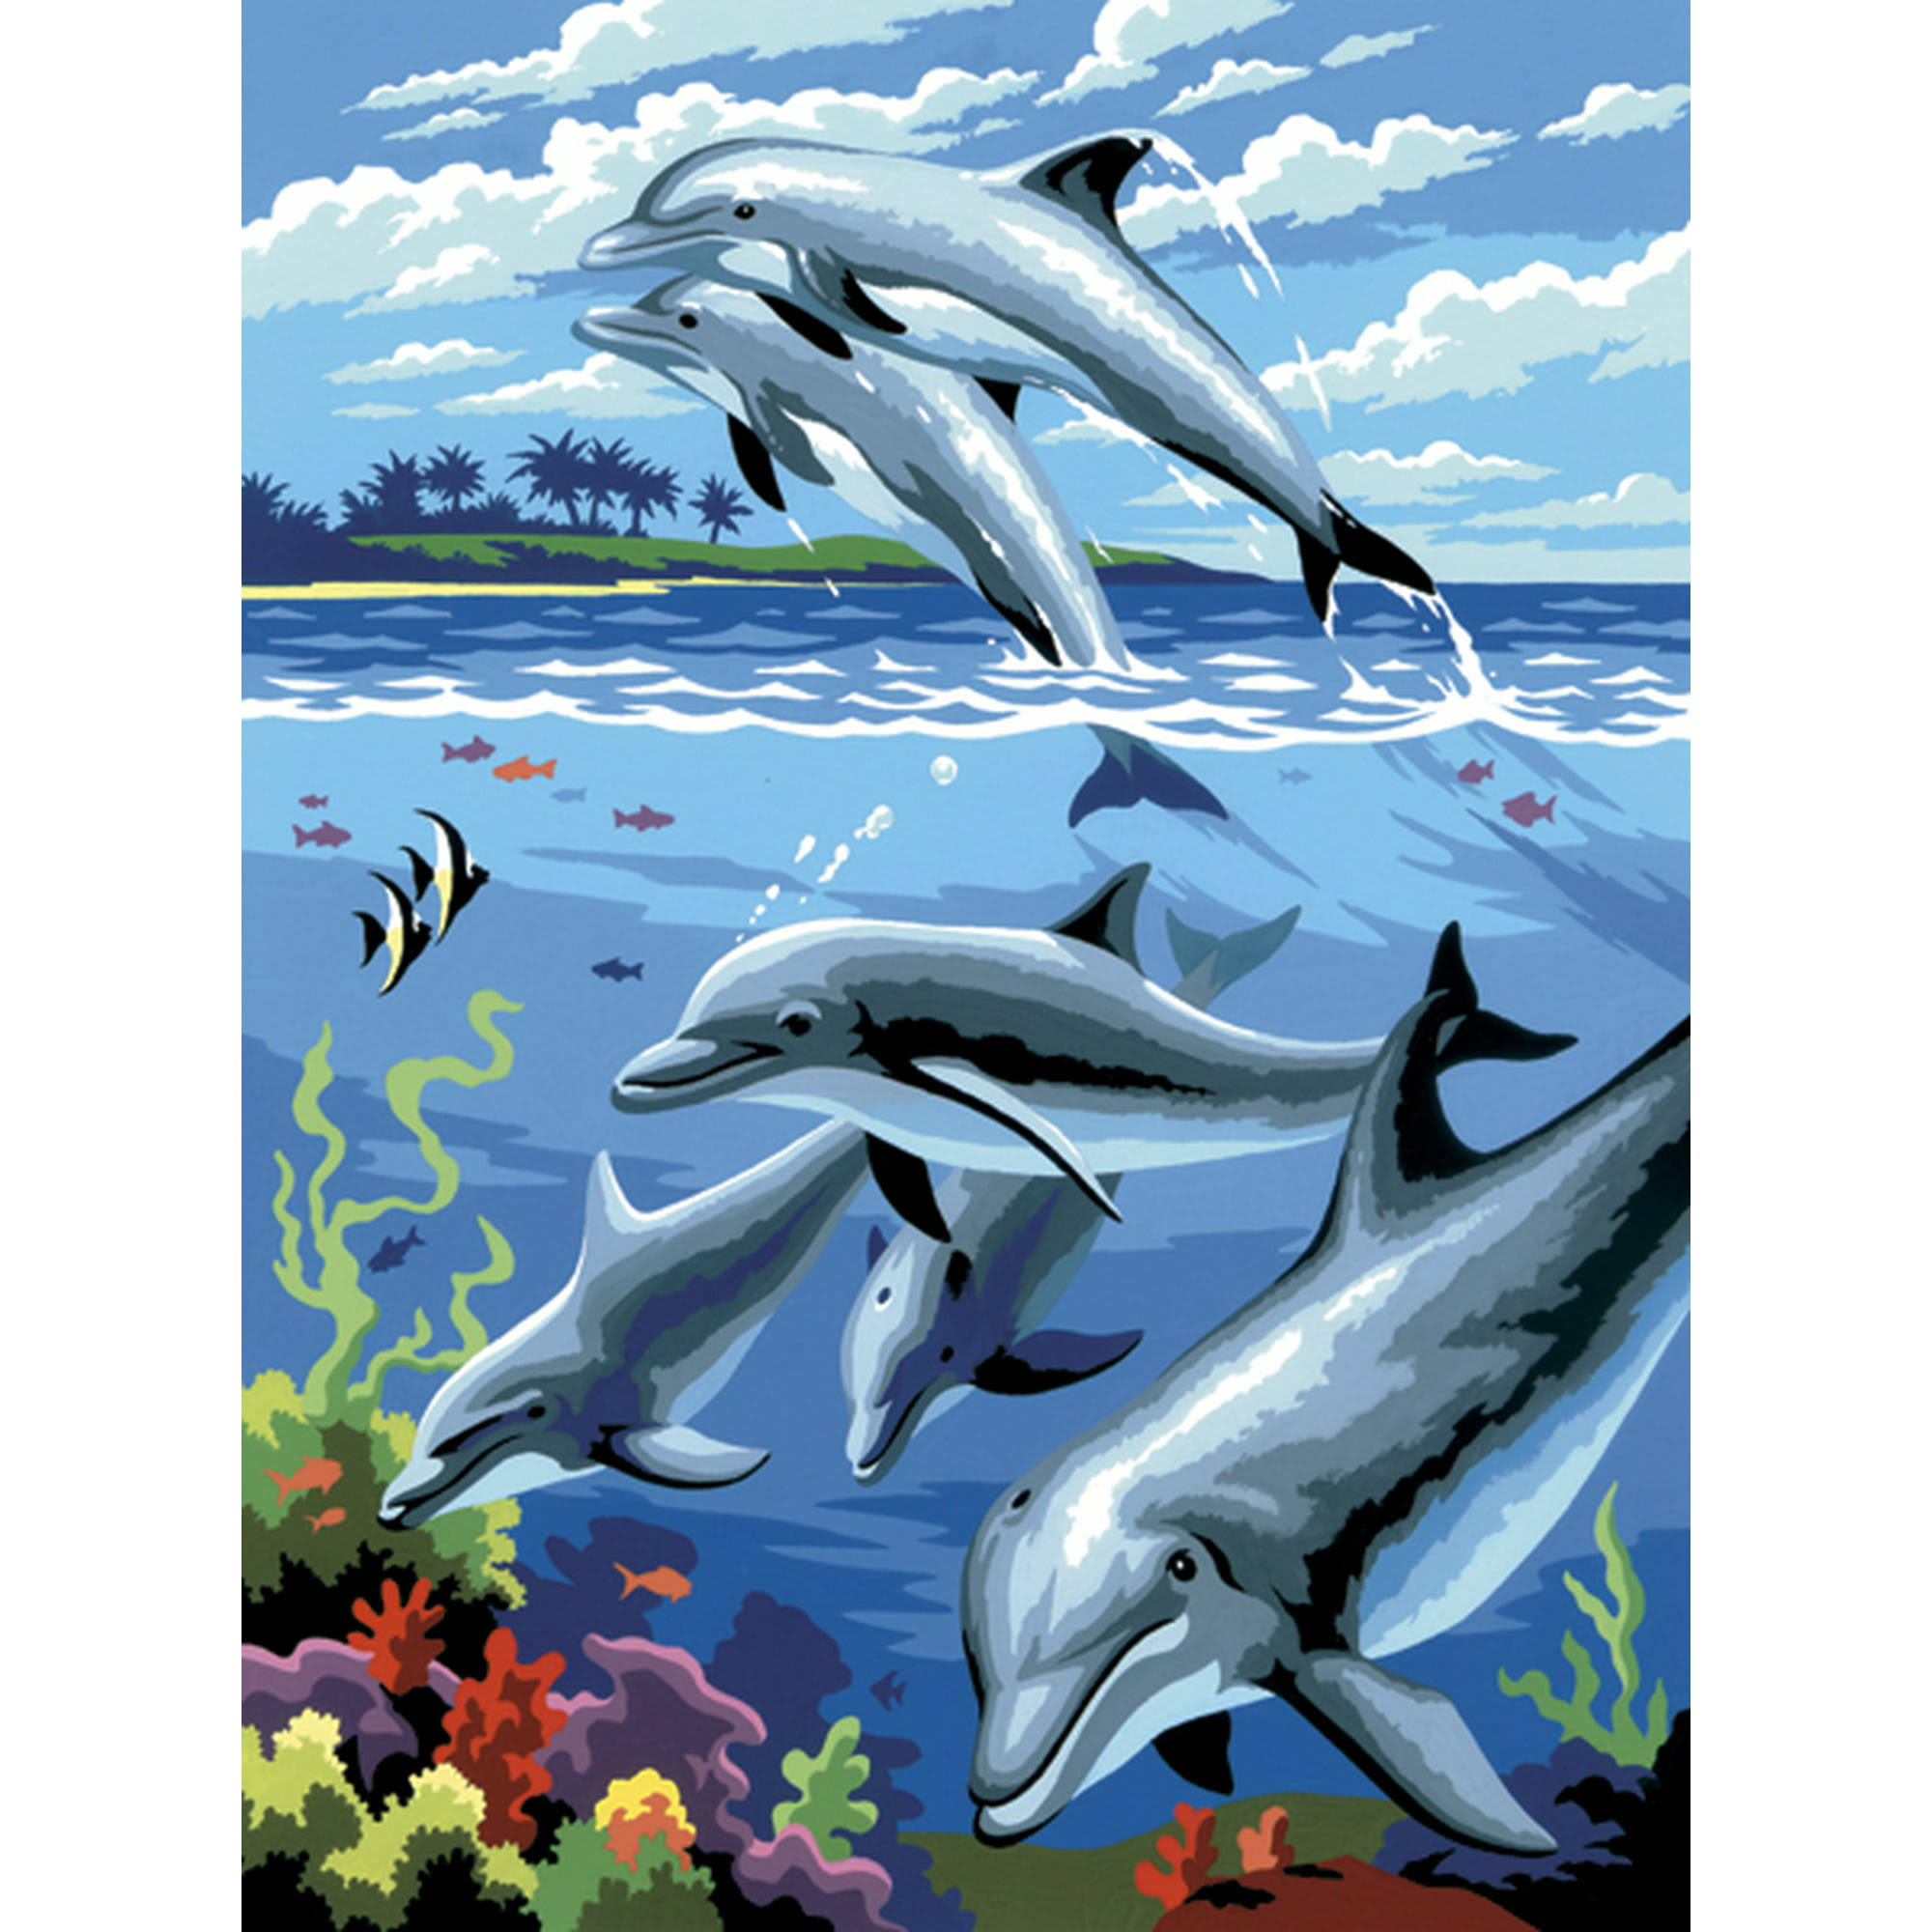 Royal & Langnickel Painting By Numbers Junior Small Art Activity Kit - Dolphins